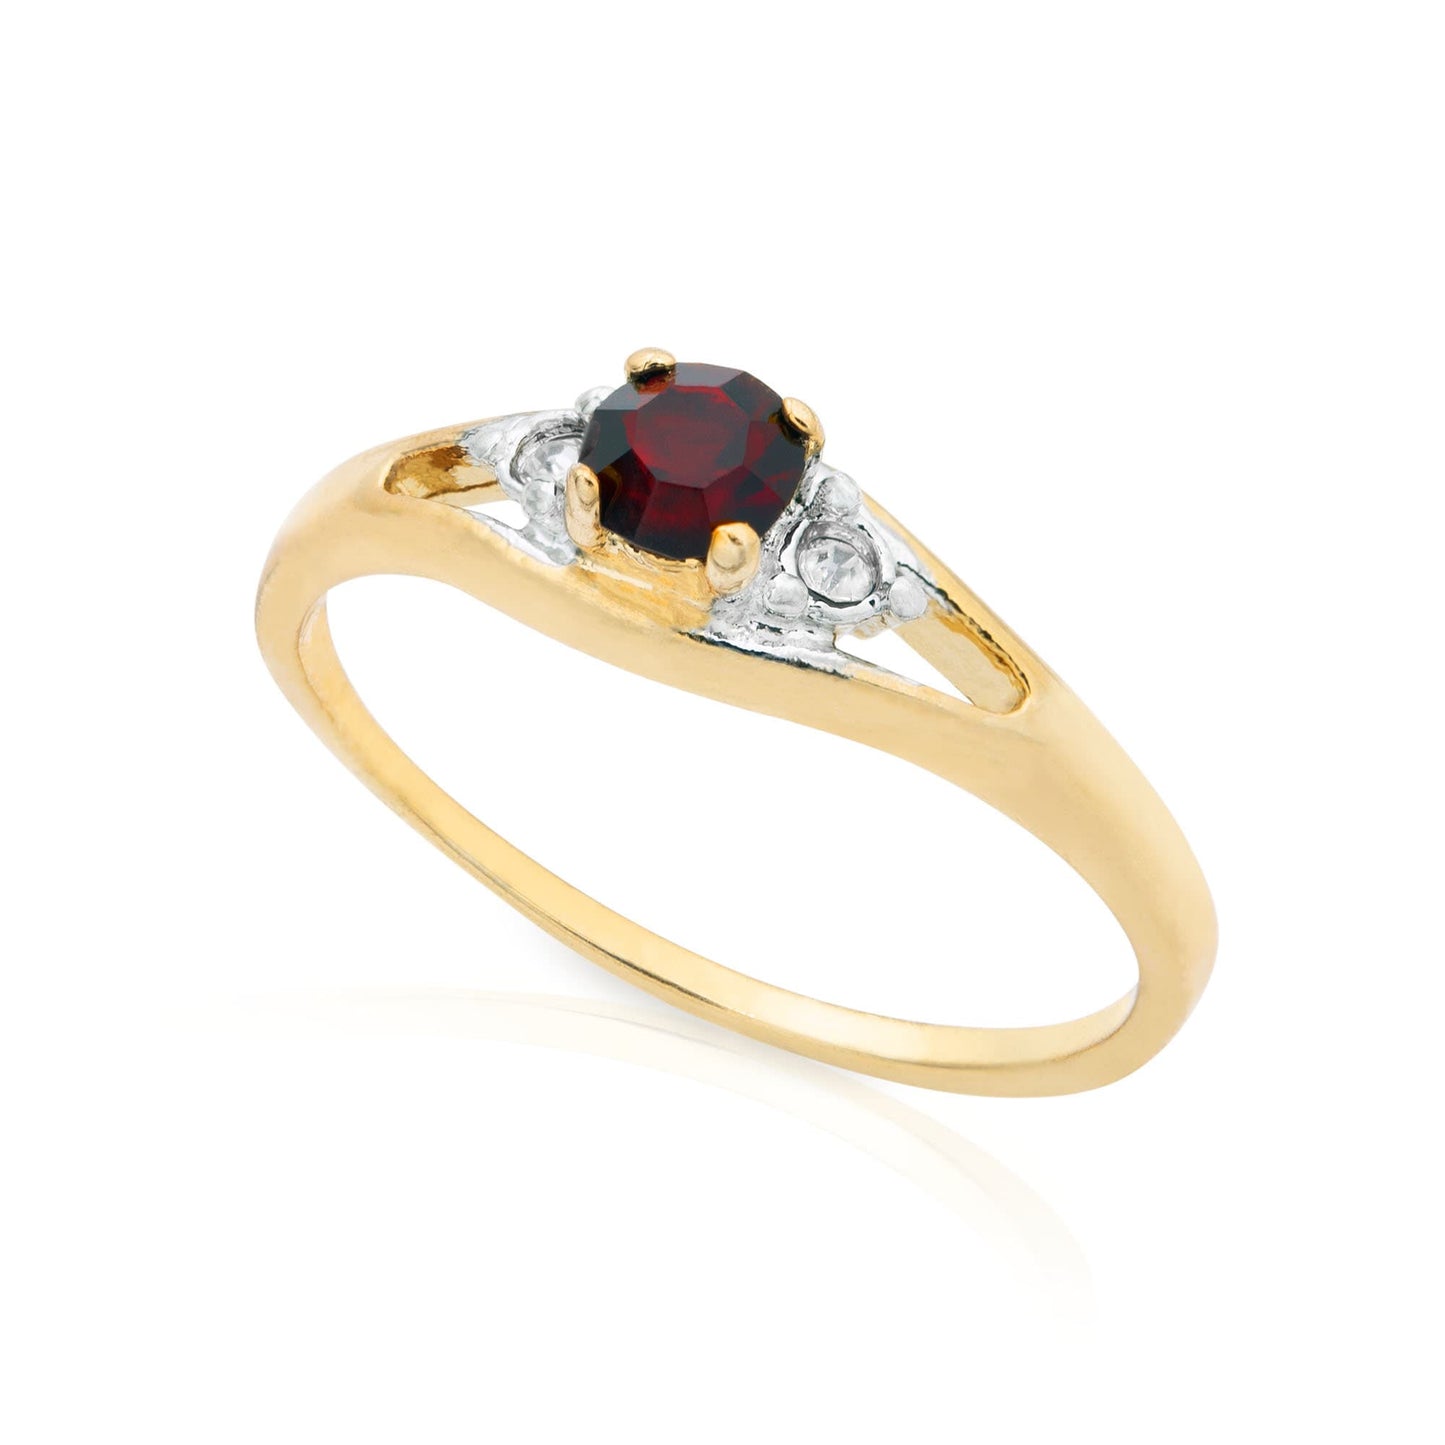 Vintage Garnet with Clear Austrian Crystal Accents 18k Gold Womans Antique Rings R2891